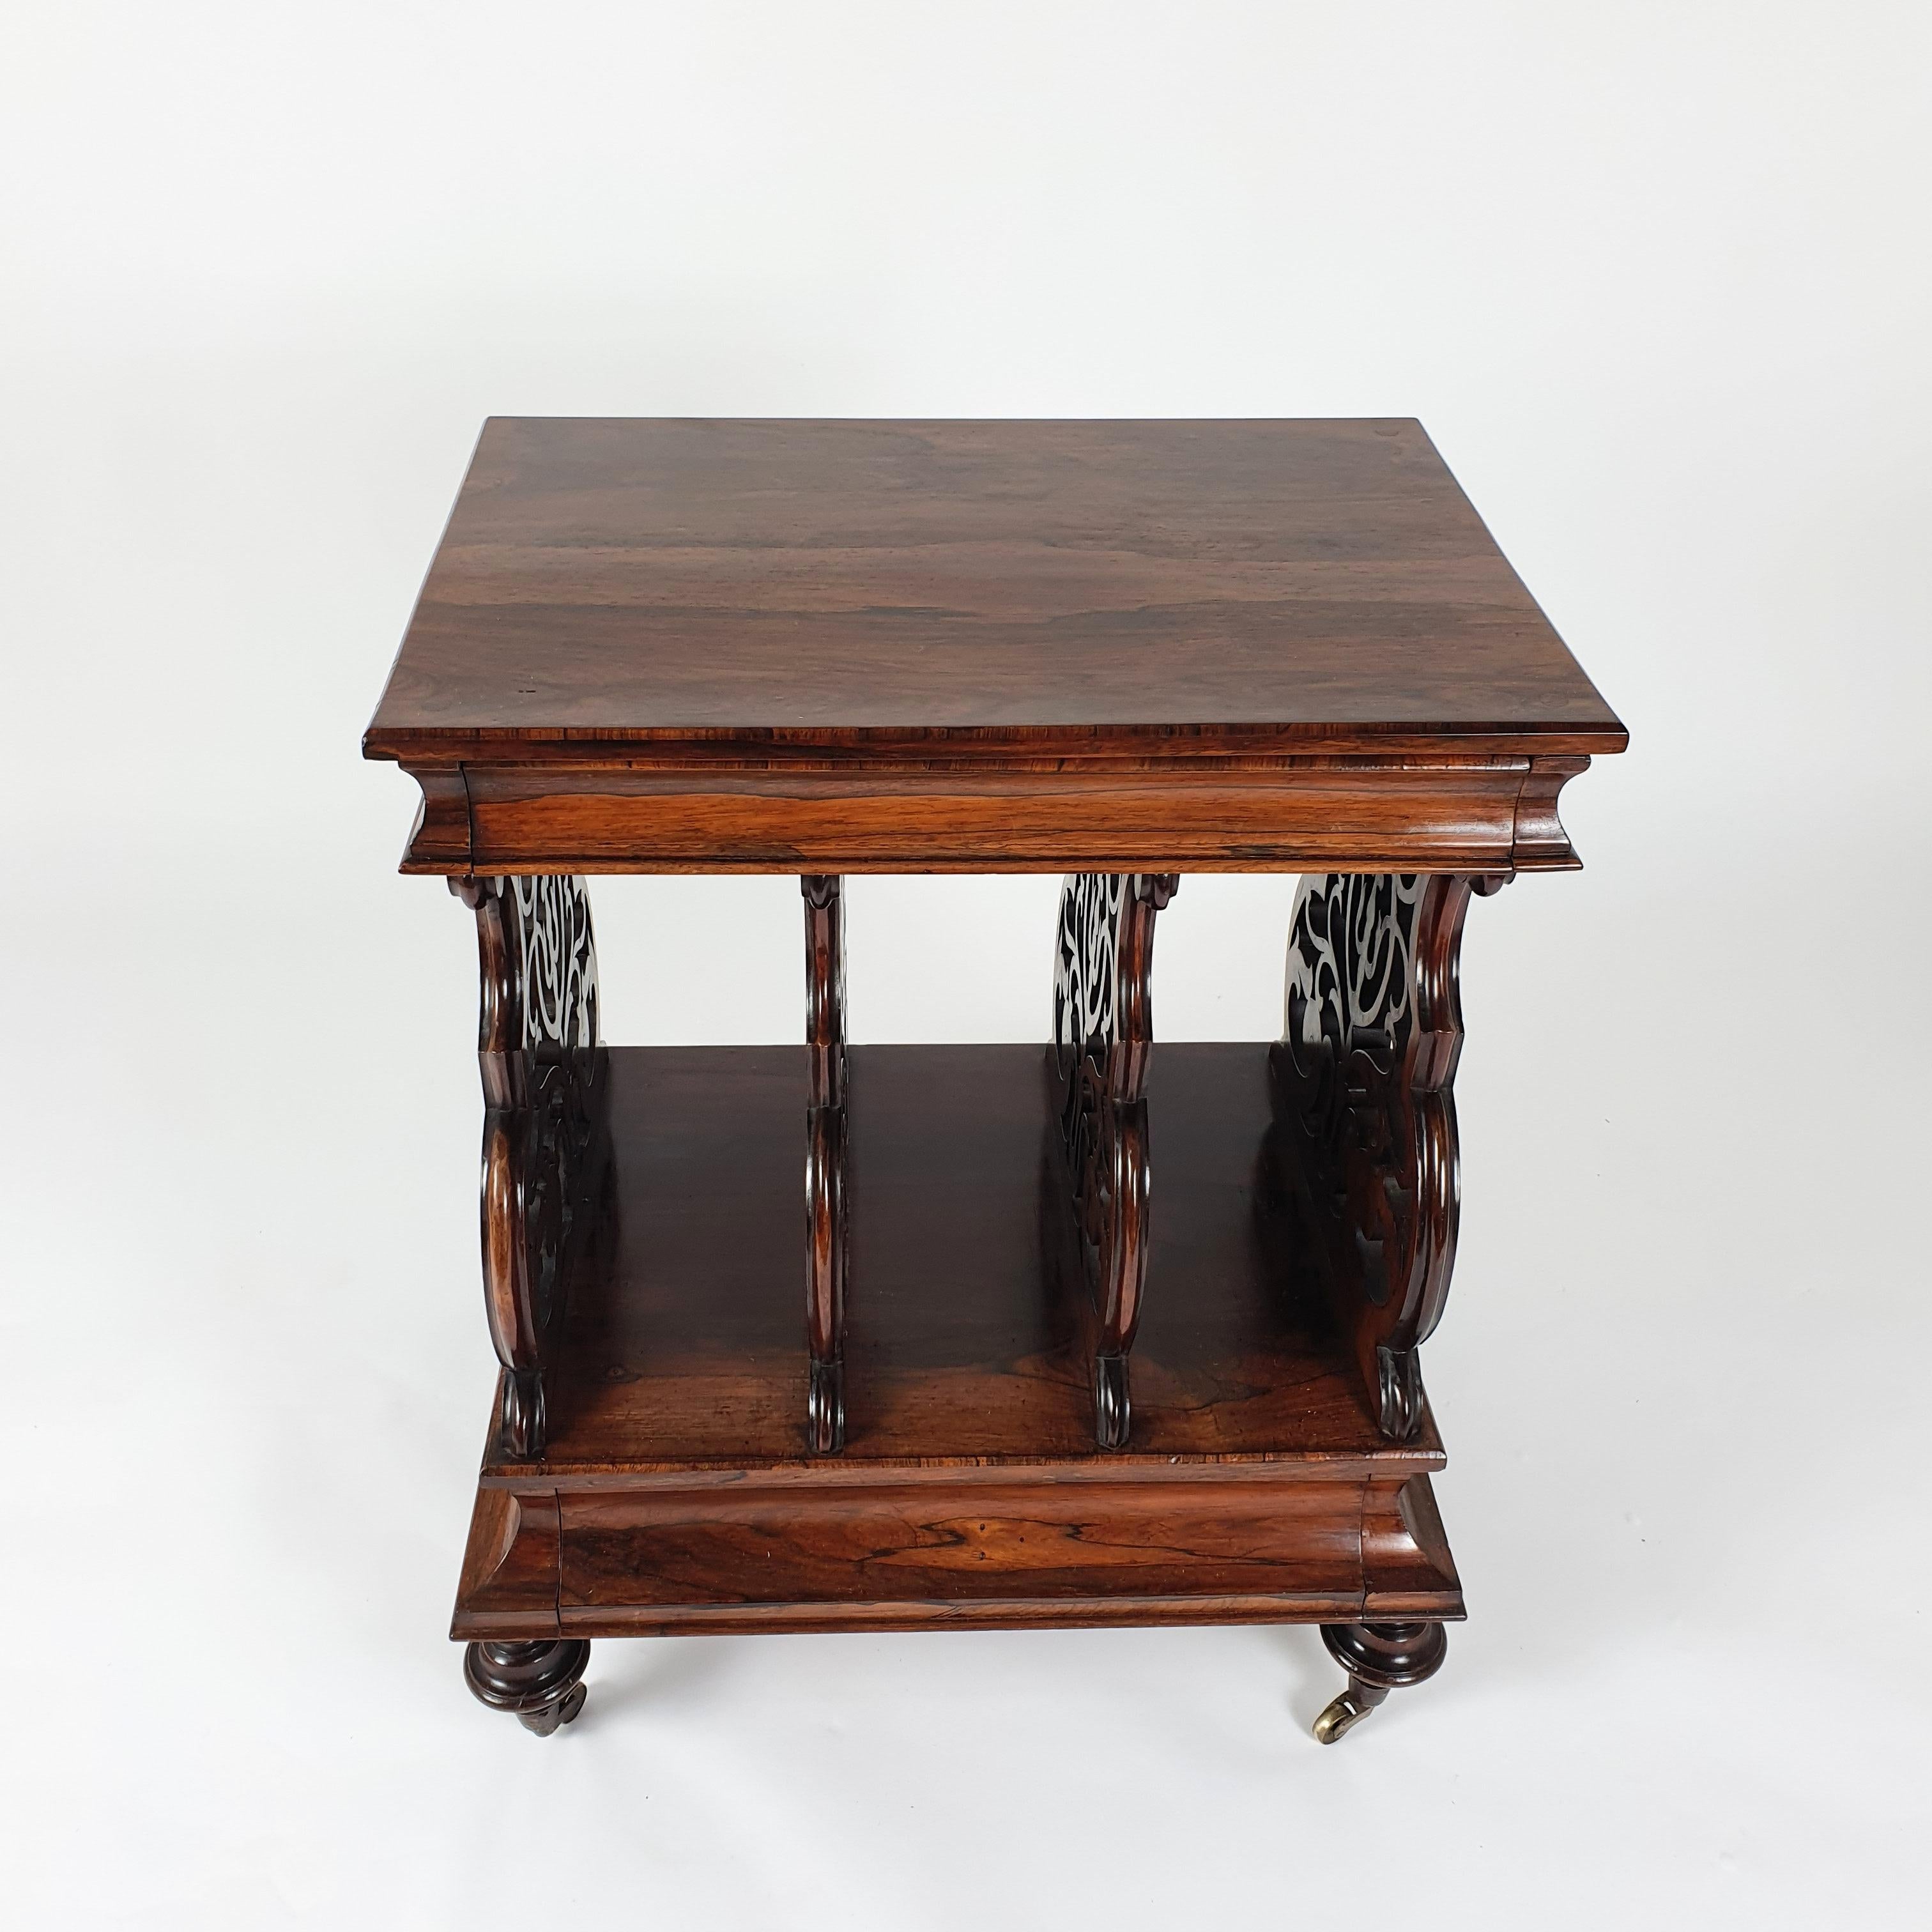 This splendid and very unusual design Regency rosewood Canterbury is attributed to Gillows and features the original brass castors. The Canterbury has a very attractive ‘X’ frame series of divisions with a single drawer below.
It measures 20 in,